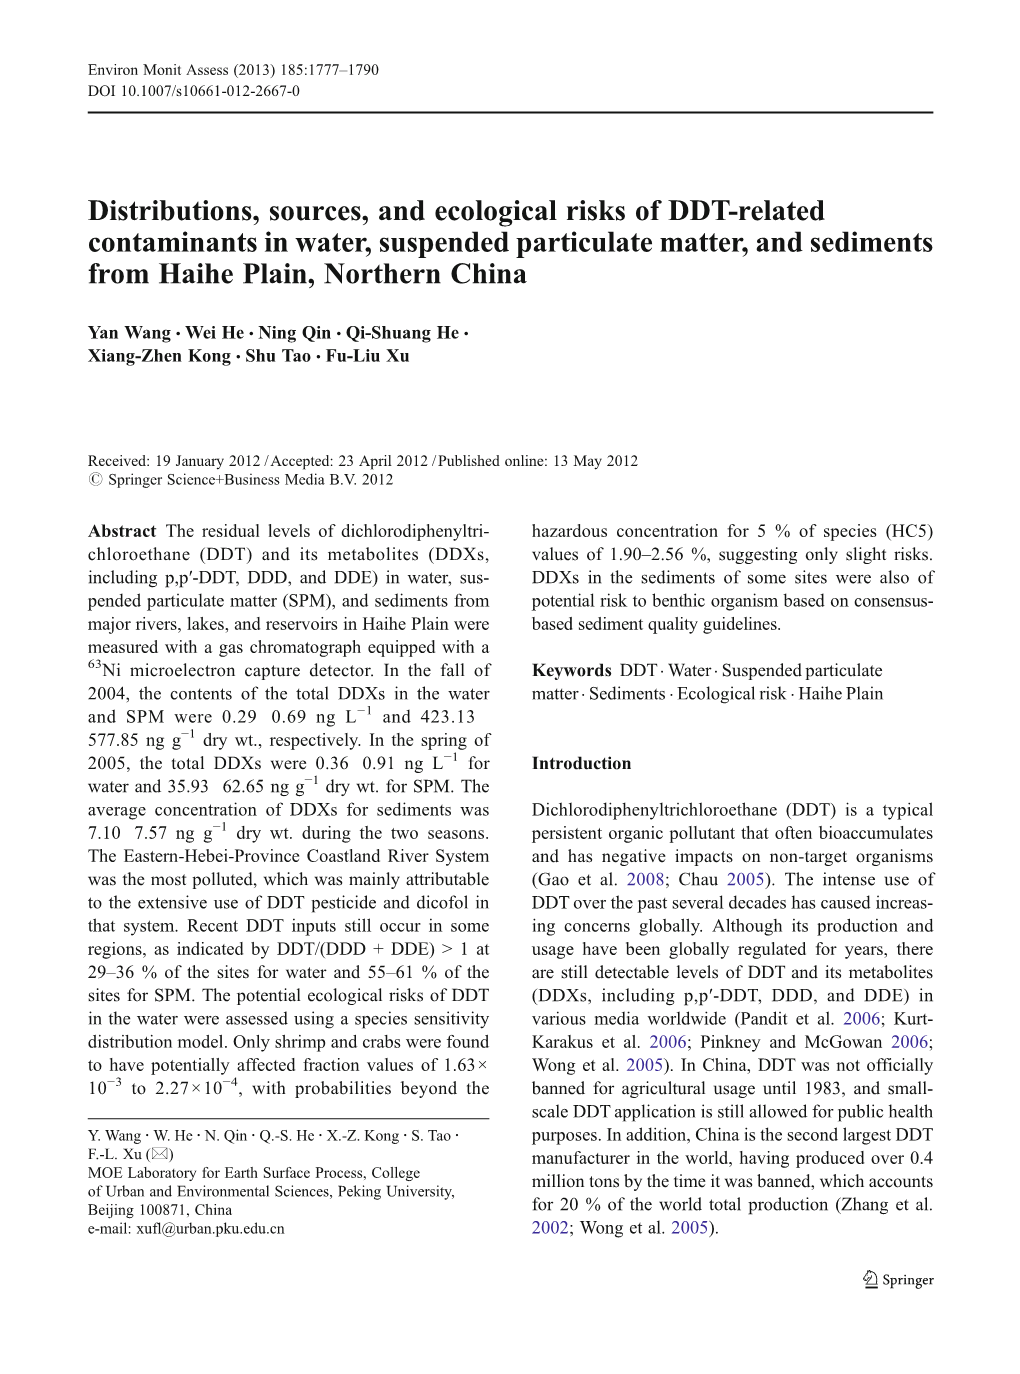 Distributions, Sources, and Ecological Risks of DDT-Related Contaminants in Water, Suspended Particulate Matter, and Sediments from Haihe Plain, Northern China